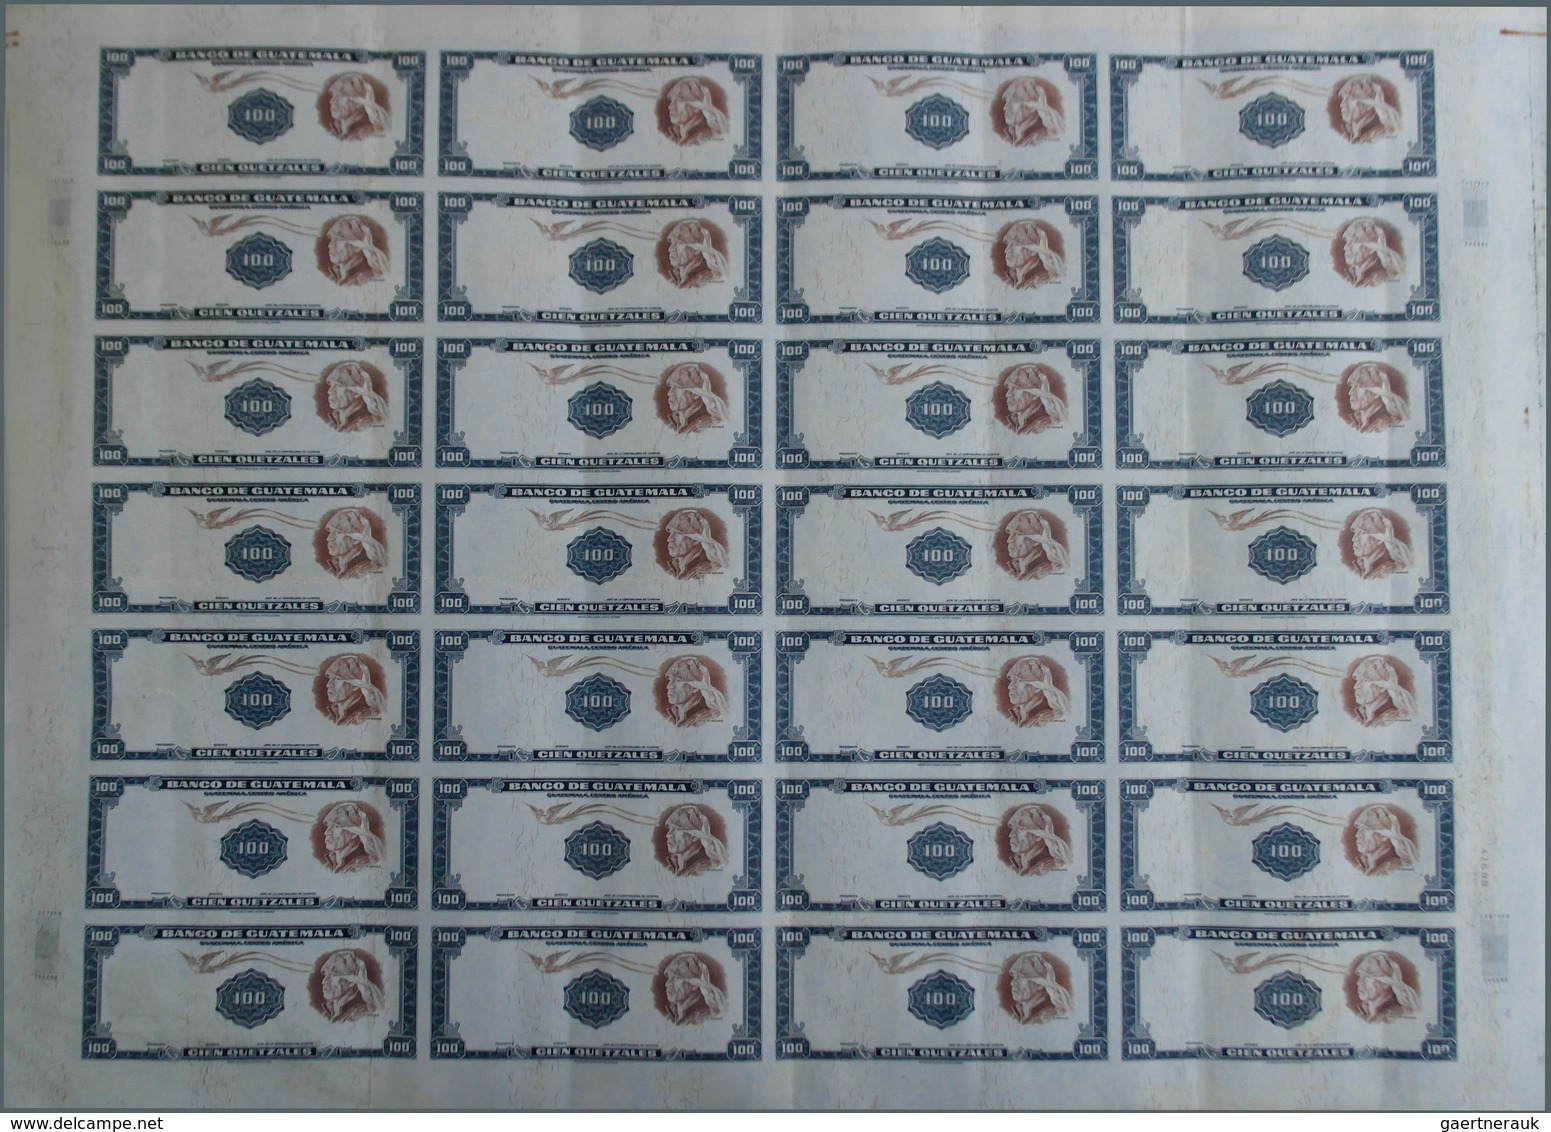 Guatemala: Complete Uncut Sheet 28x 100 Quetzales 1960-65 On Thick Cardboard (P.50 For Type) With Pr - Guatemala